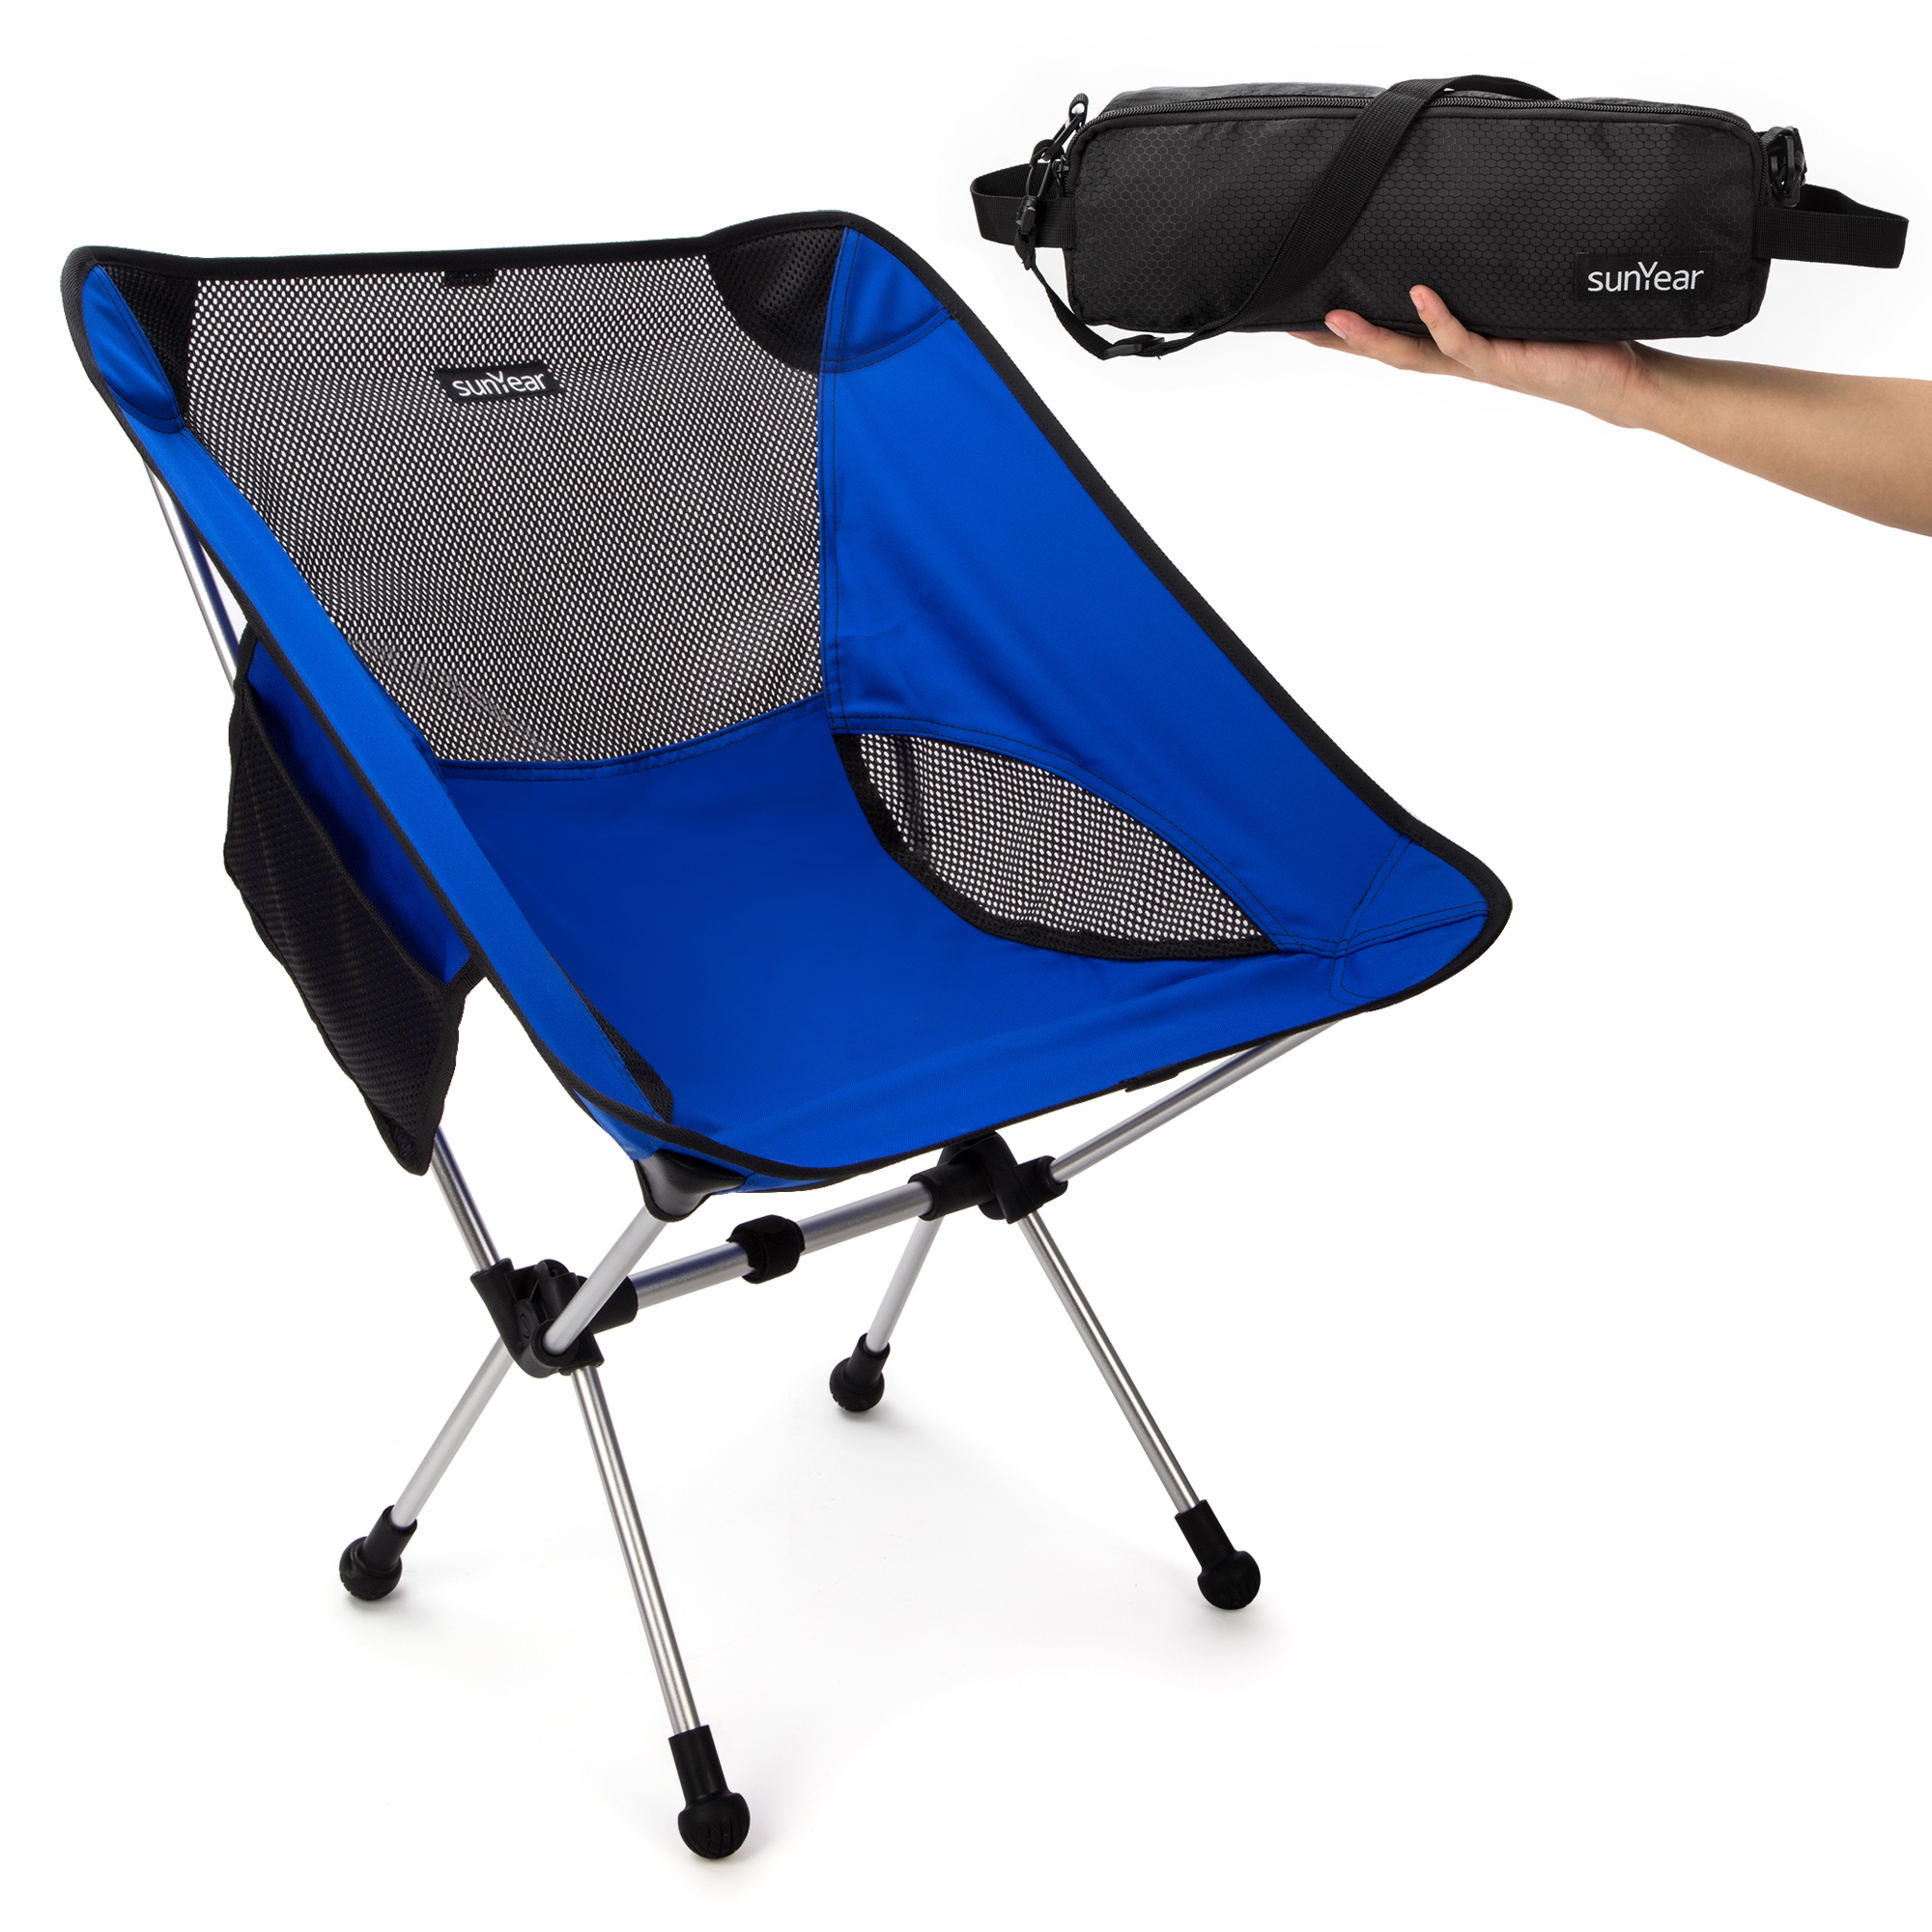 Sunyear Lightweight Compact Folding Camping Chairs Review